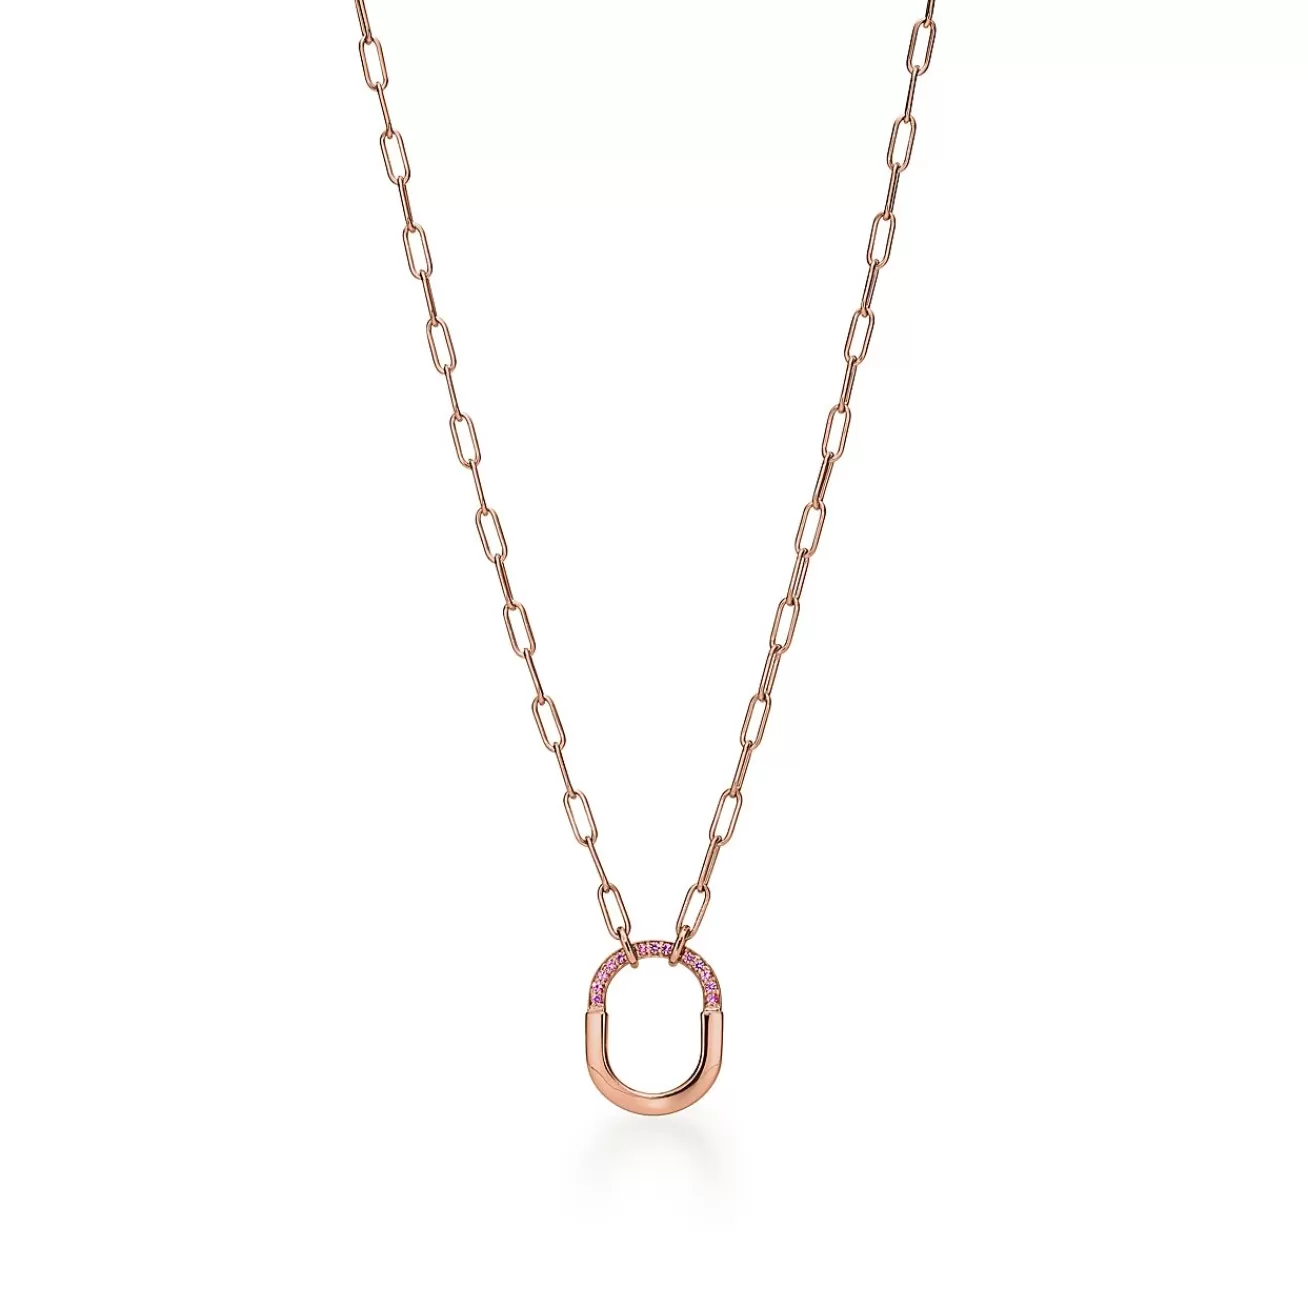 Tiffany & Co. Tiffany Lock Small Pendant in Rose Gold with Pink Sapphires | ^ Necklaces & Pendants | Gifts for Her